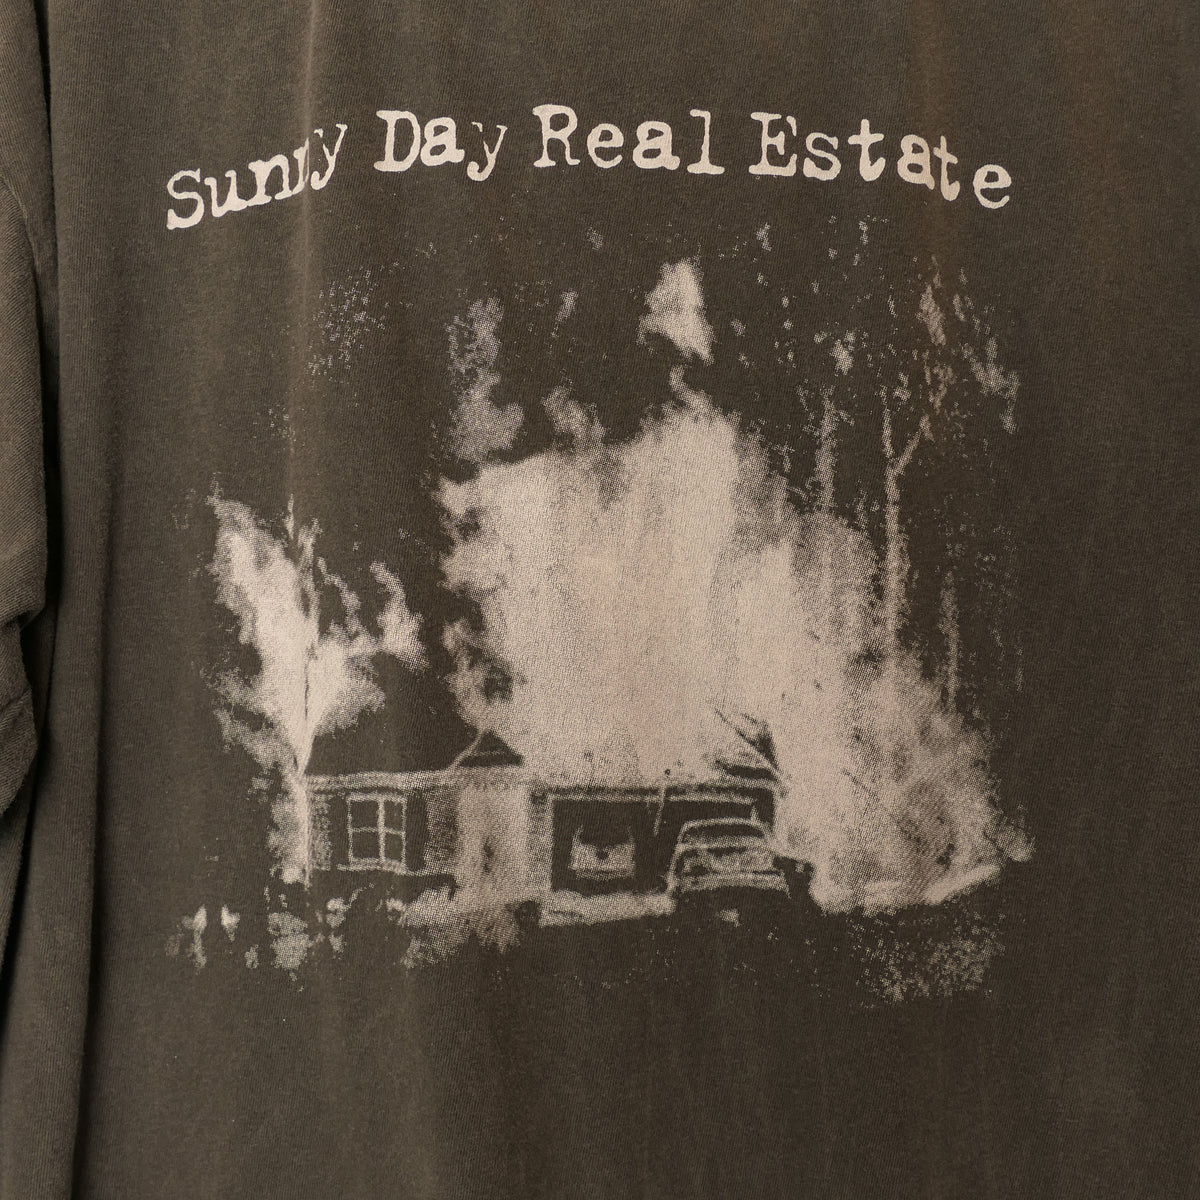 Sunny Day Real Estate Tee